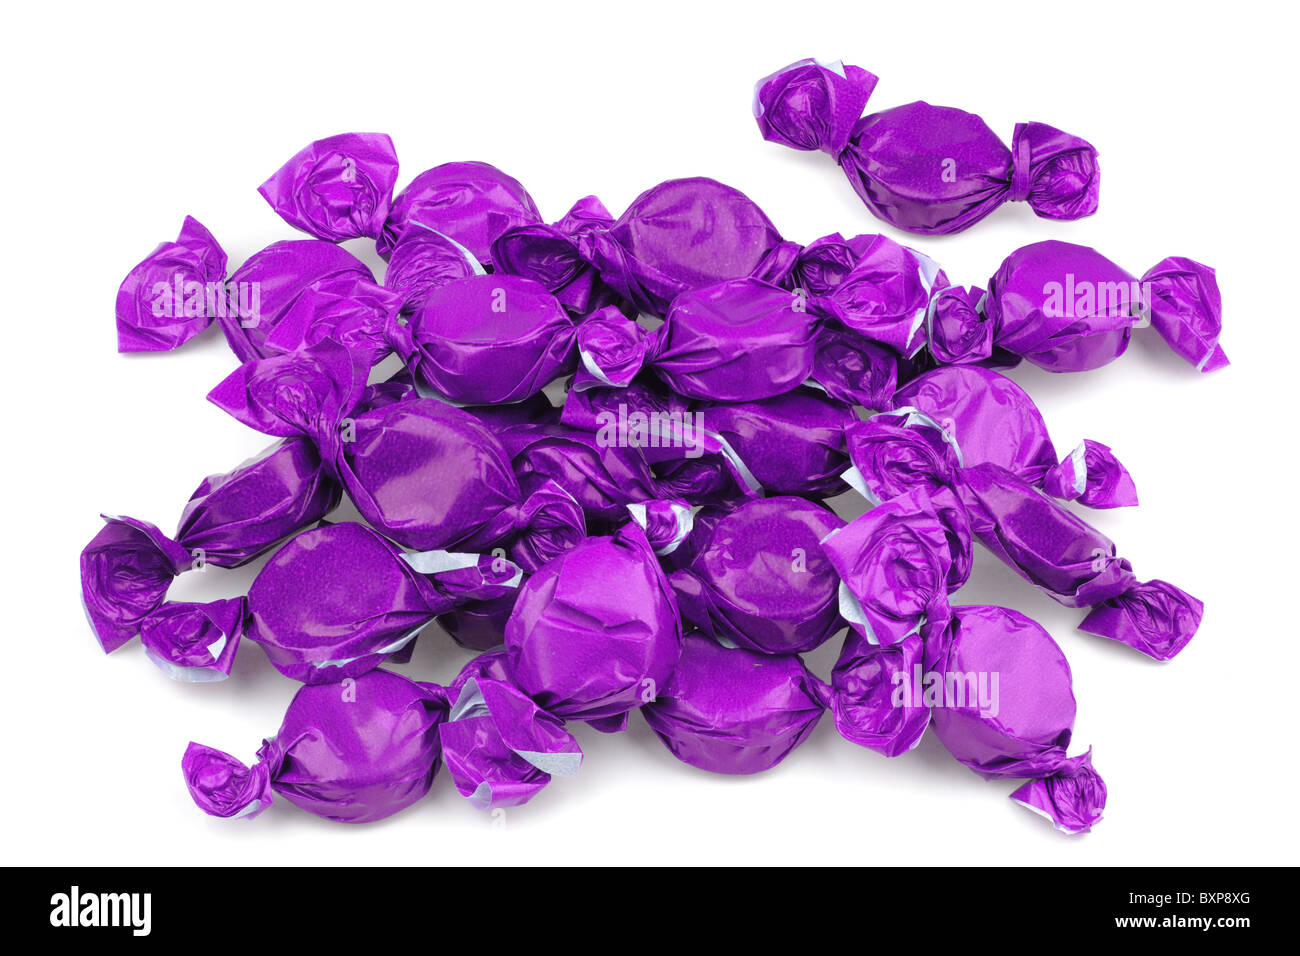 Pile of purple wrapped toffees Stock Photo